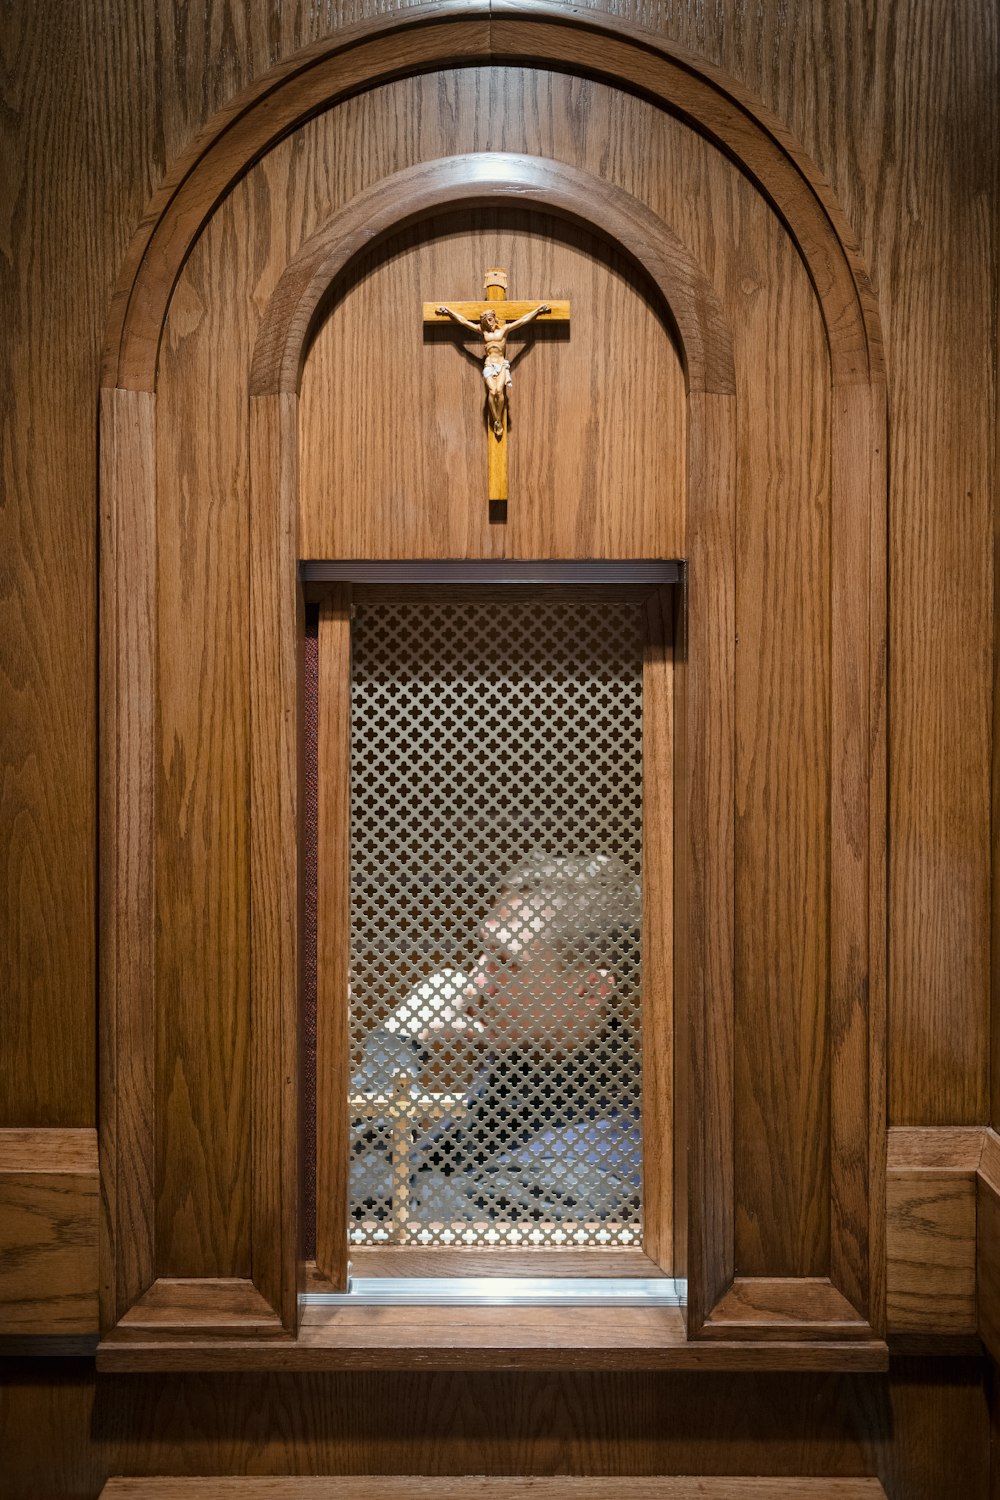 a wooden wall with a crucifix on it